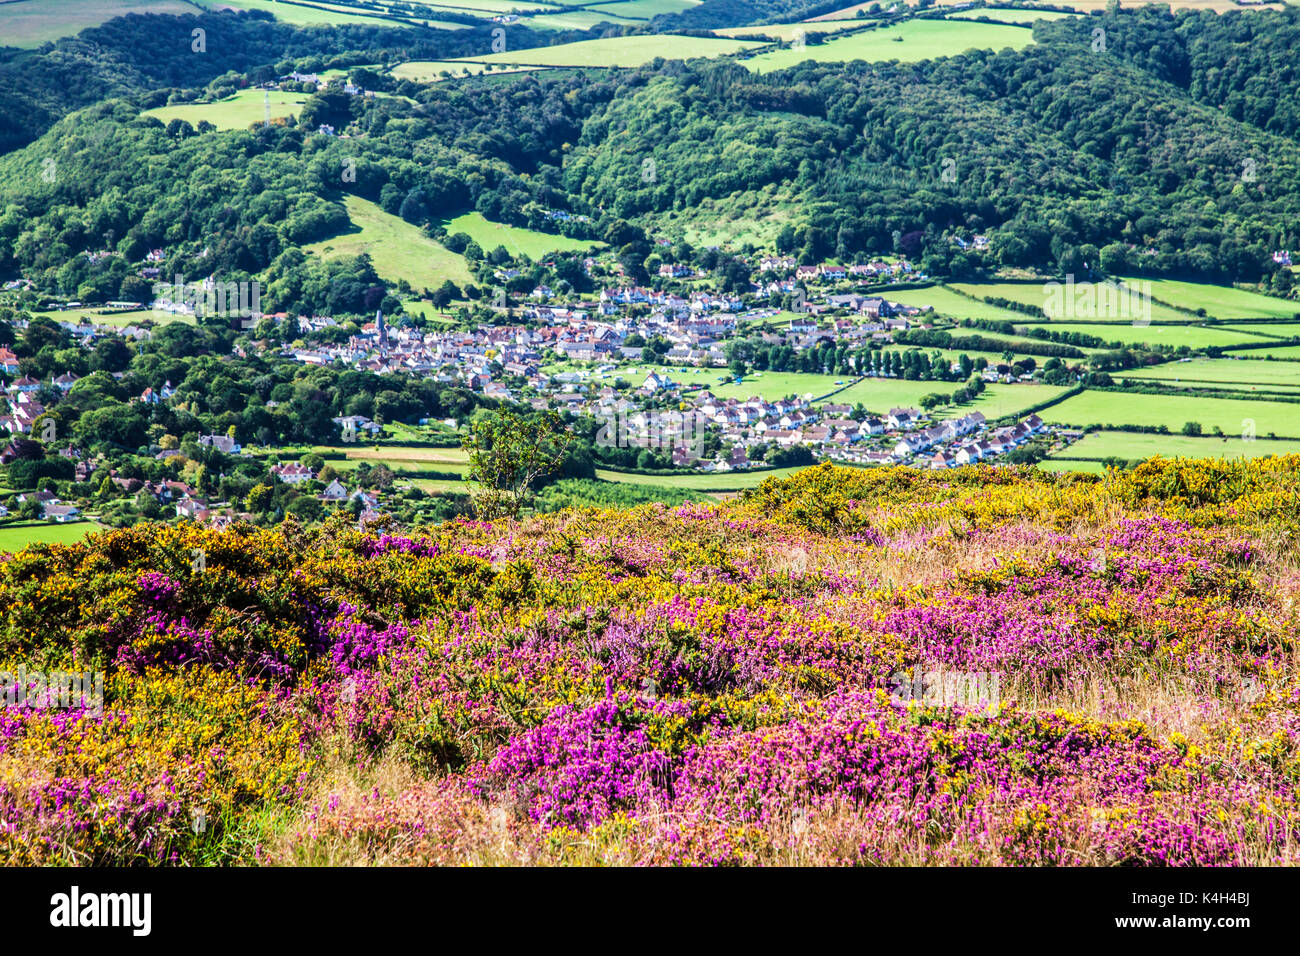 The view over Porlock Bay in the Exmoor National Park,Somerset. Stock Photo